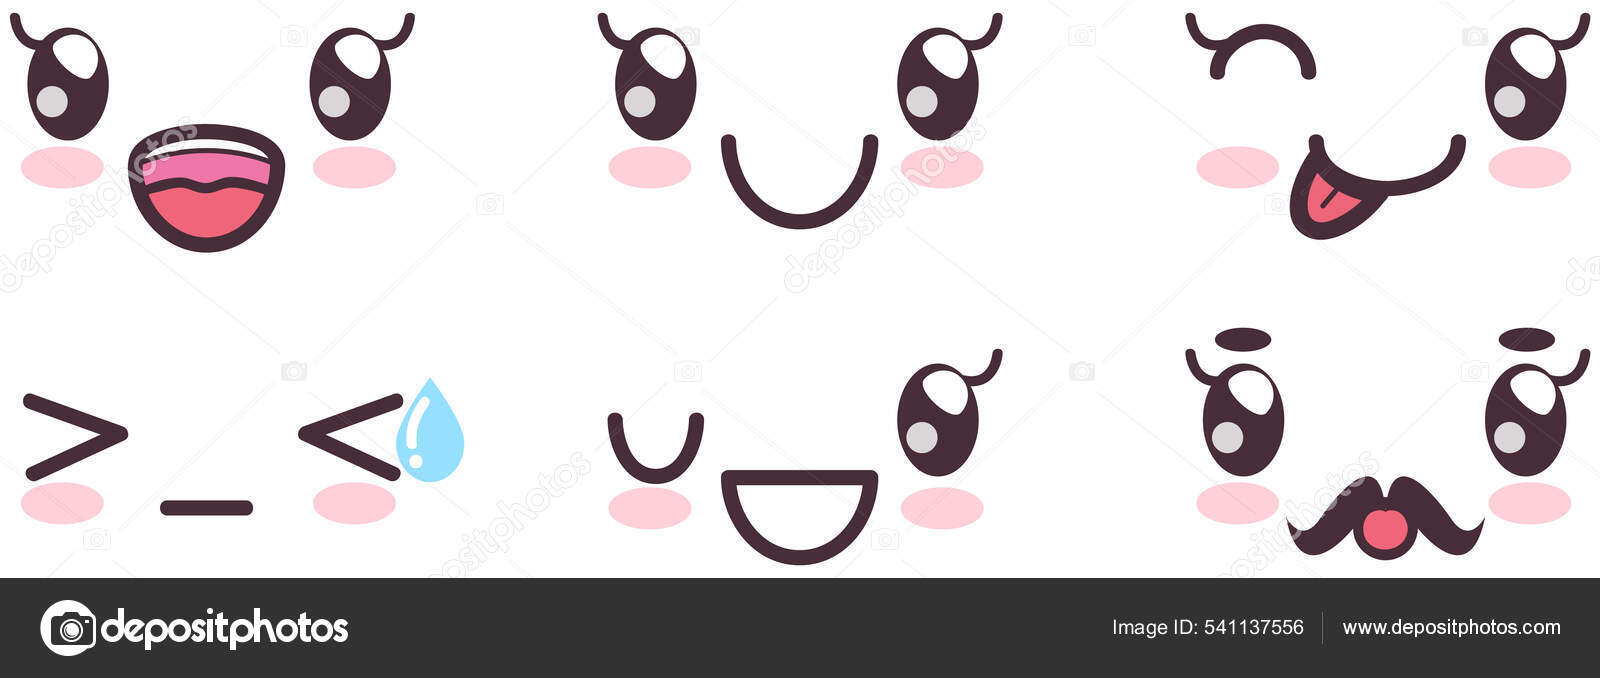 Set of kawaii faces. Collection of kawaii eyes and mouths with